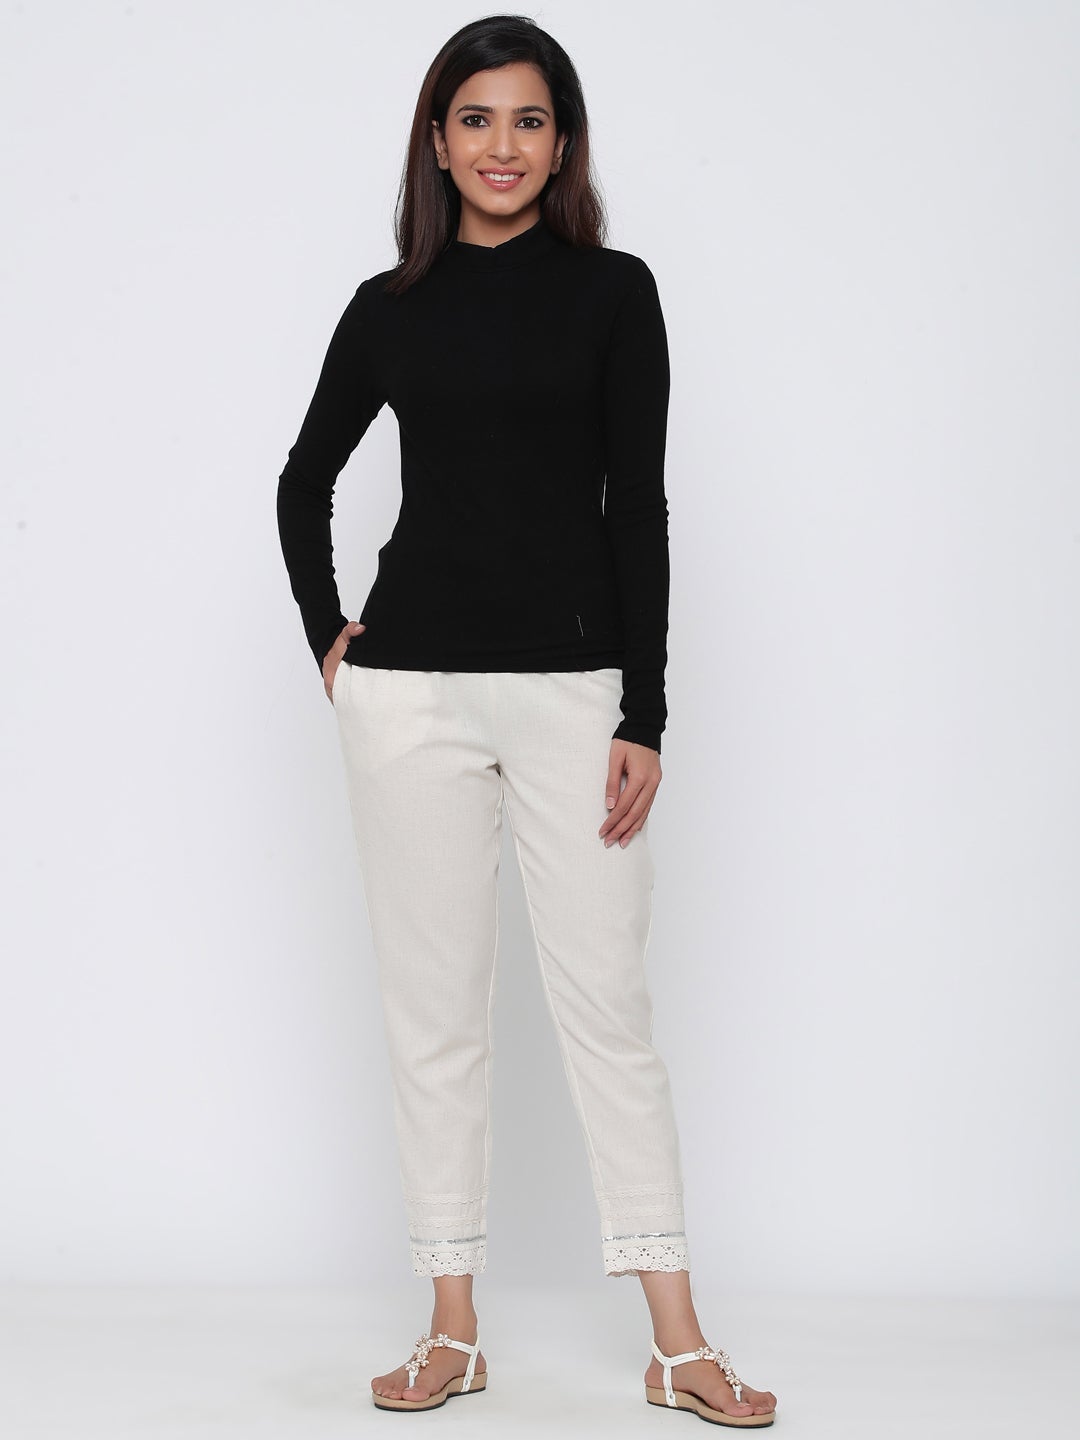 Off White Cotton Slim Fit Embroidered Cigarette Trousers For Women's -  Naari - 3107569